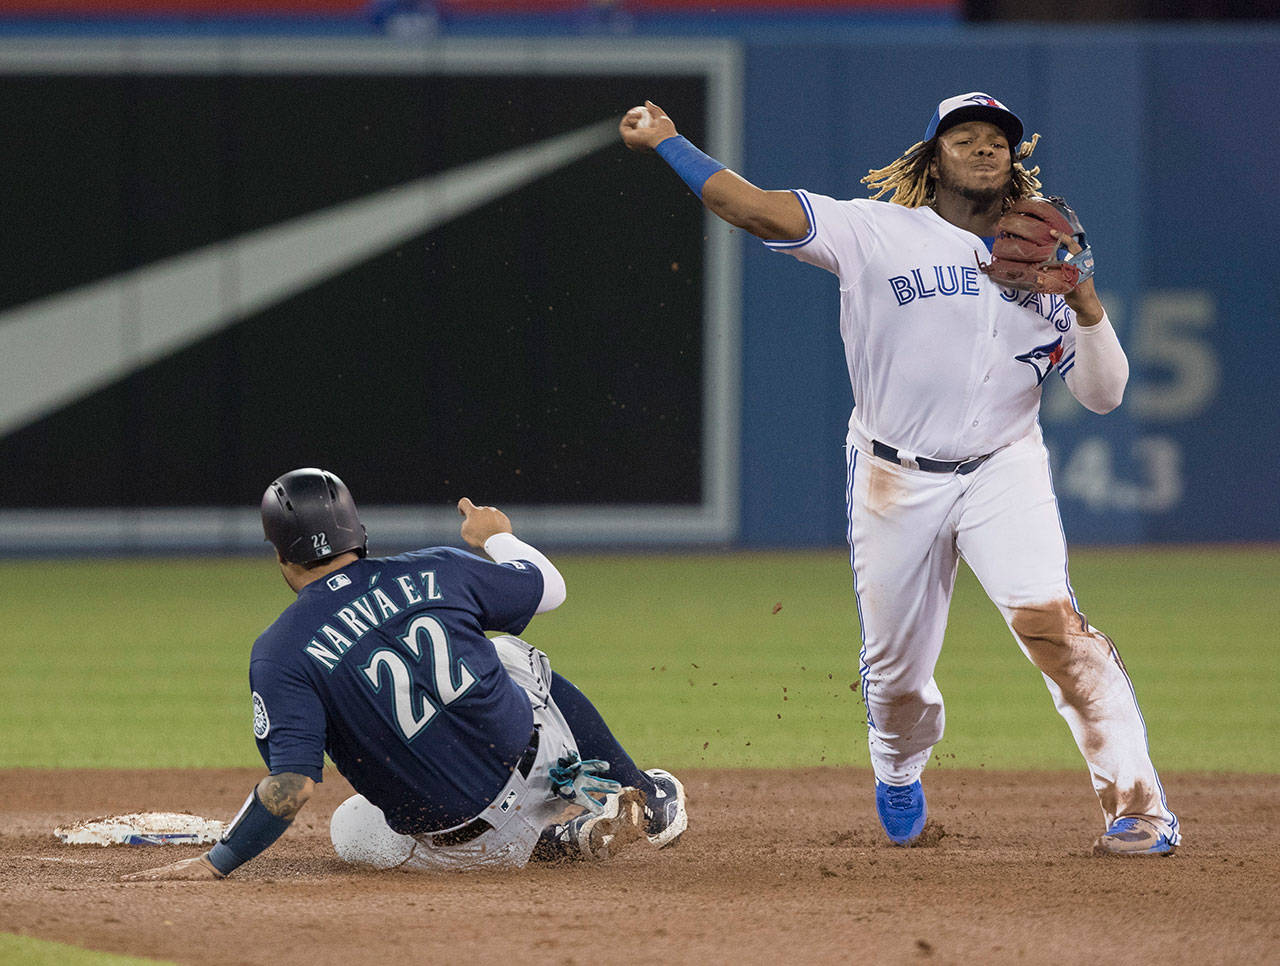 The Blue Jays’ Vladimir Guerrero Jr. throws to first after forcing out the Mariners’ Omar Navarez during the sixth inning of a game on Aug. 16, 2019, in Toronto. (Fred Thornhill/The Canadian Press via AP)